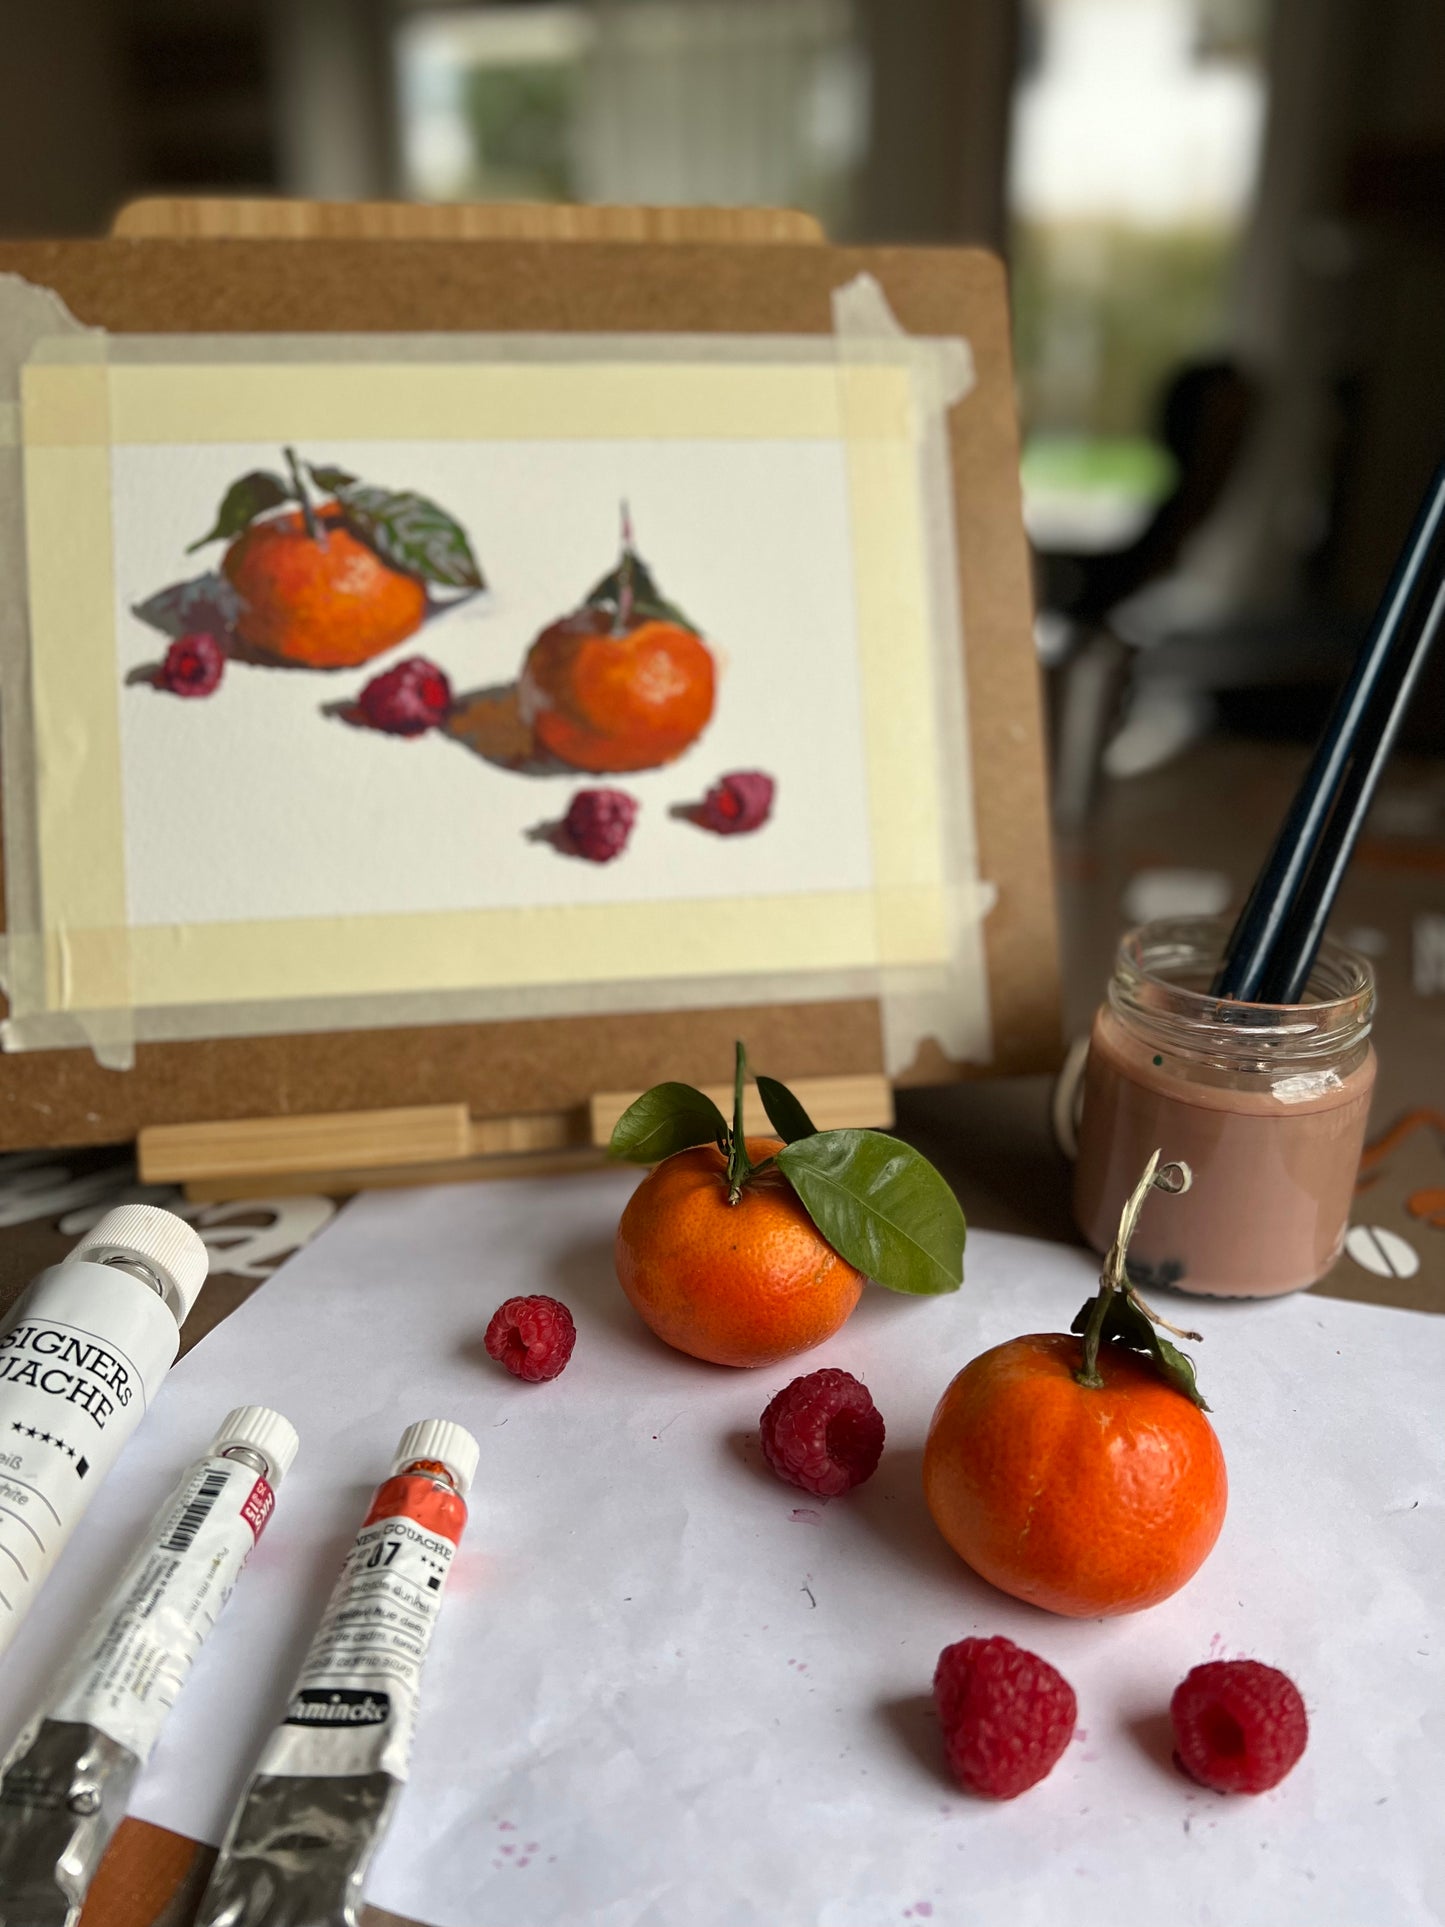 Gouache Painting - Oranges and Berries